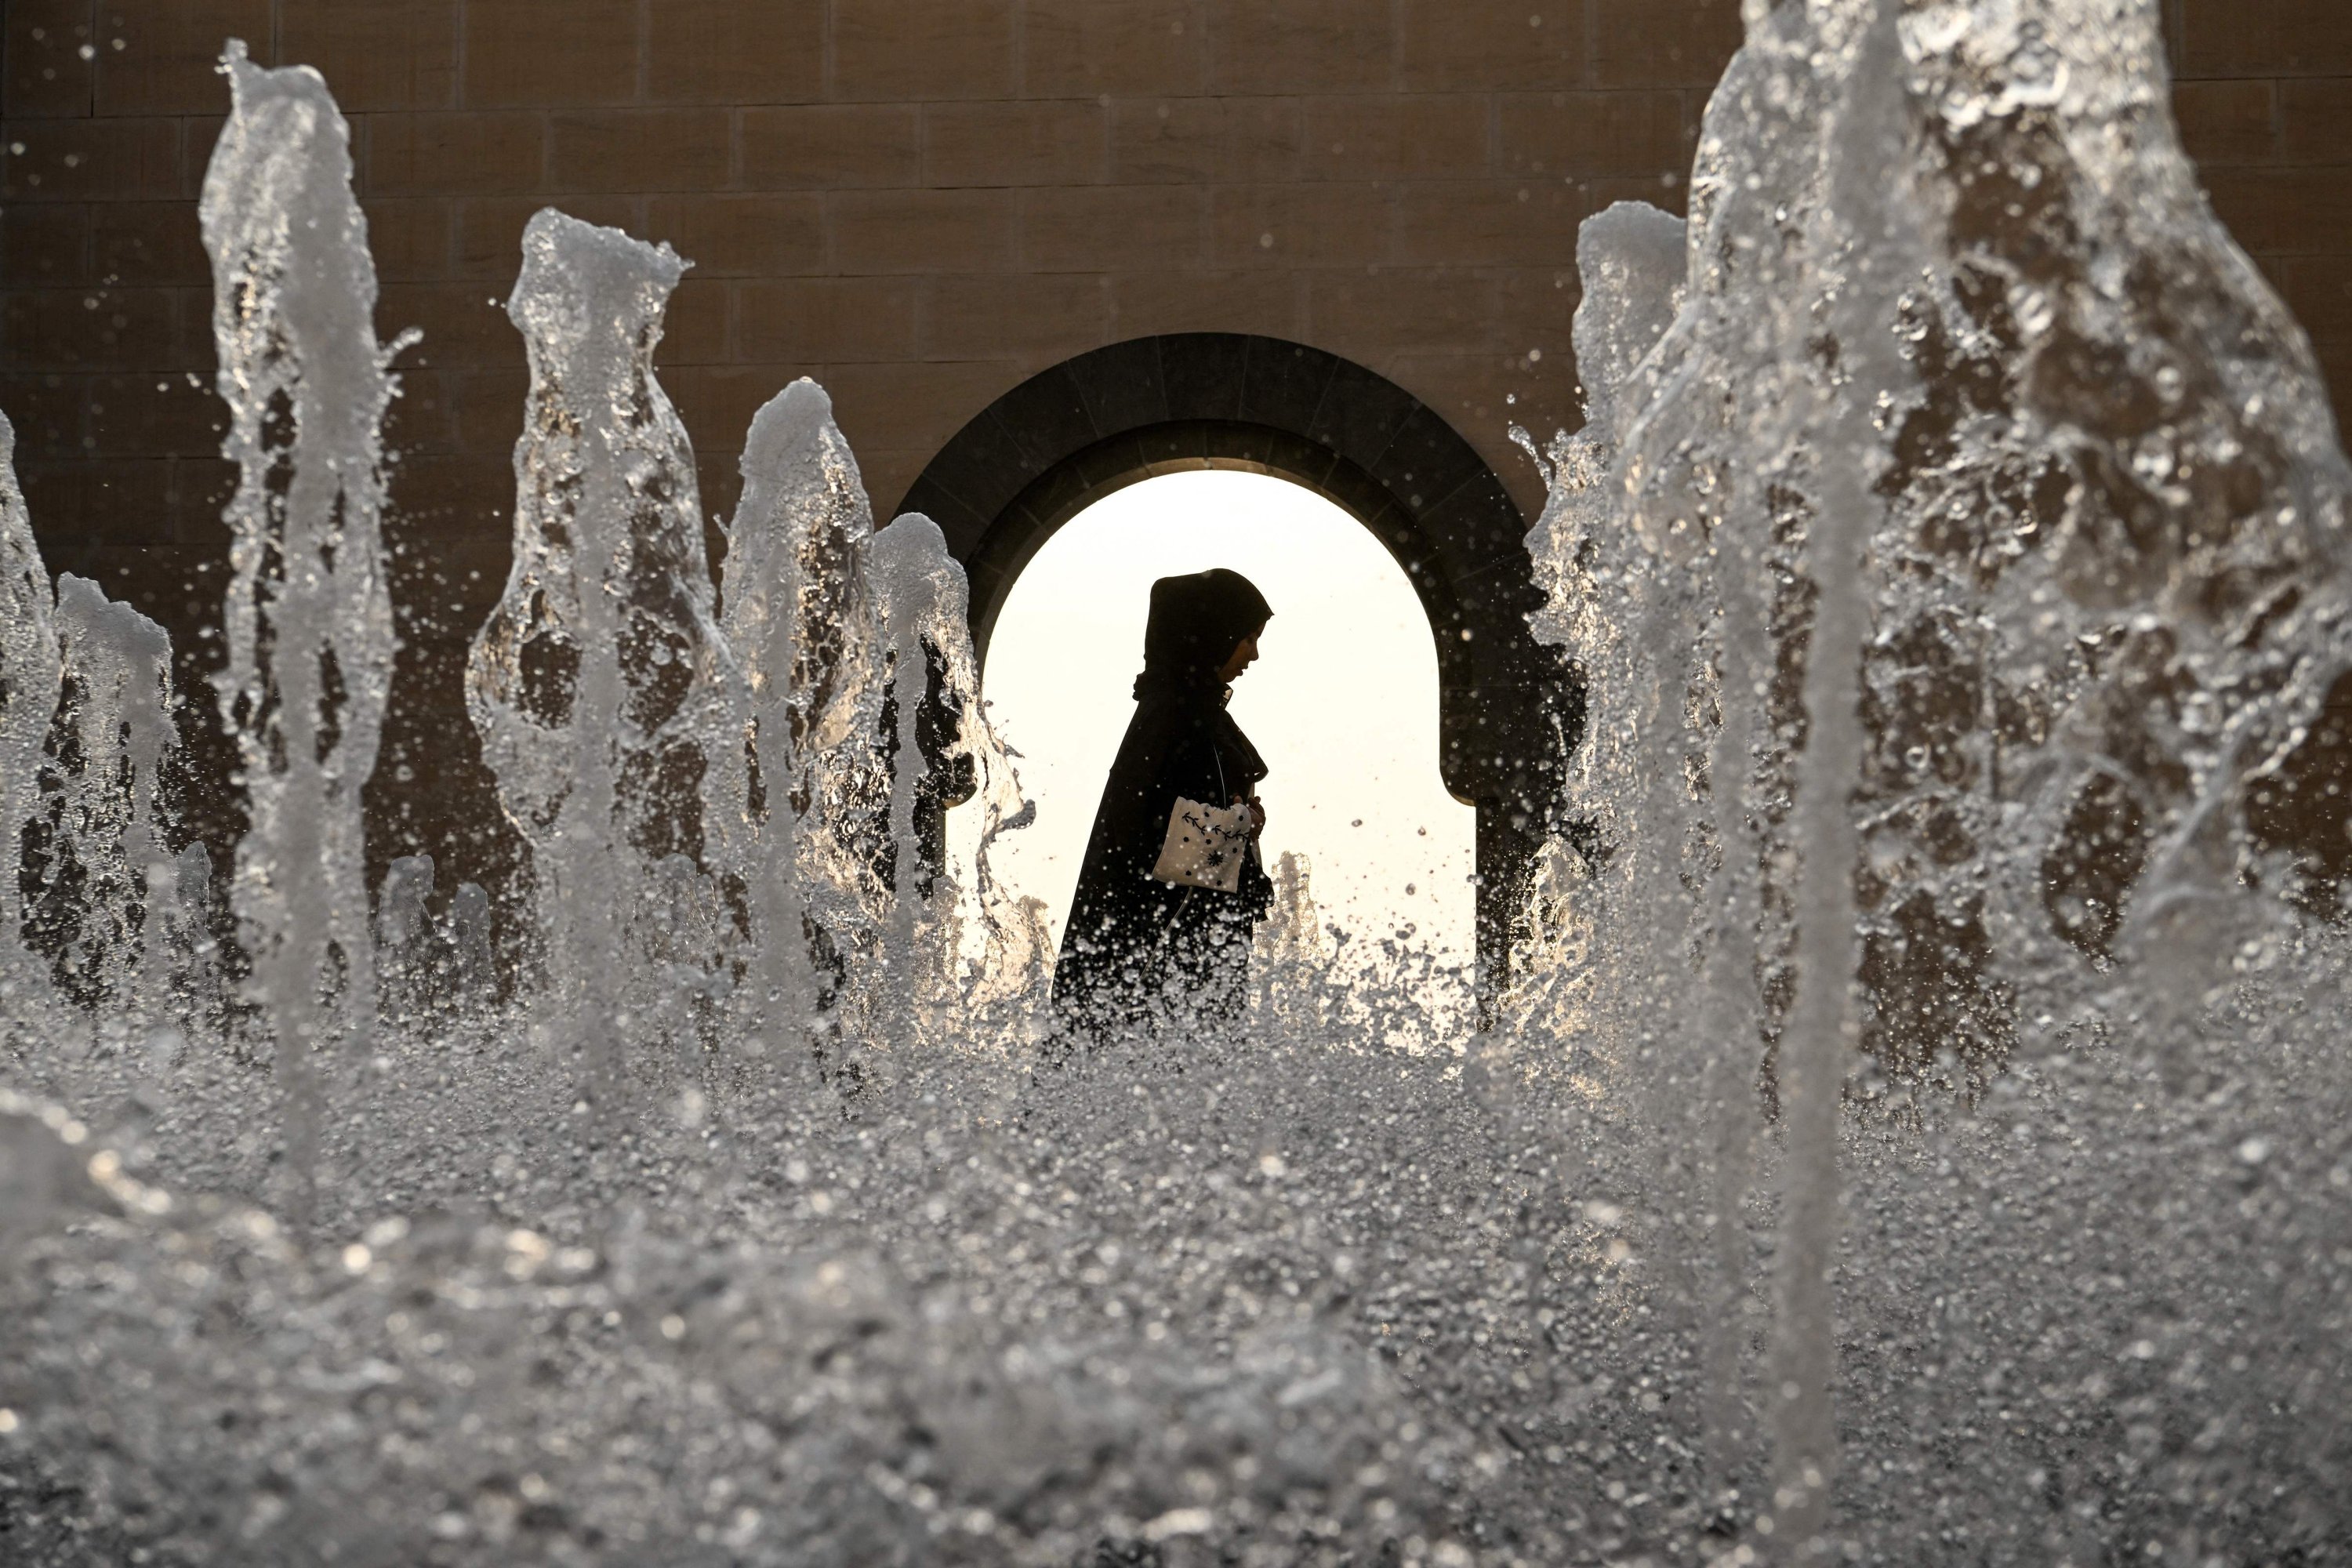 A woman walks past the fountains on the balcony at the Museum of Islamic Art in Doha, ahead of the Qatar 2022 World Cup football tournament, Qatar, Nov.13, 2022. (AFP Photo)